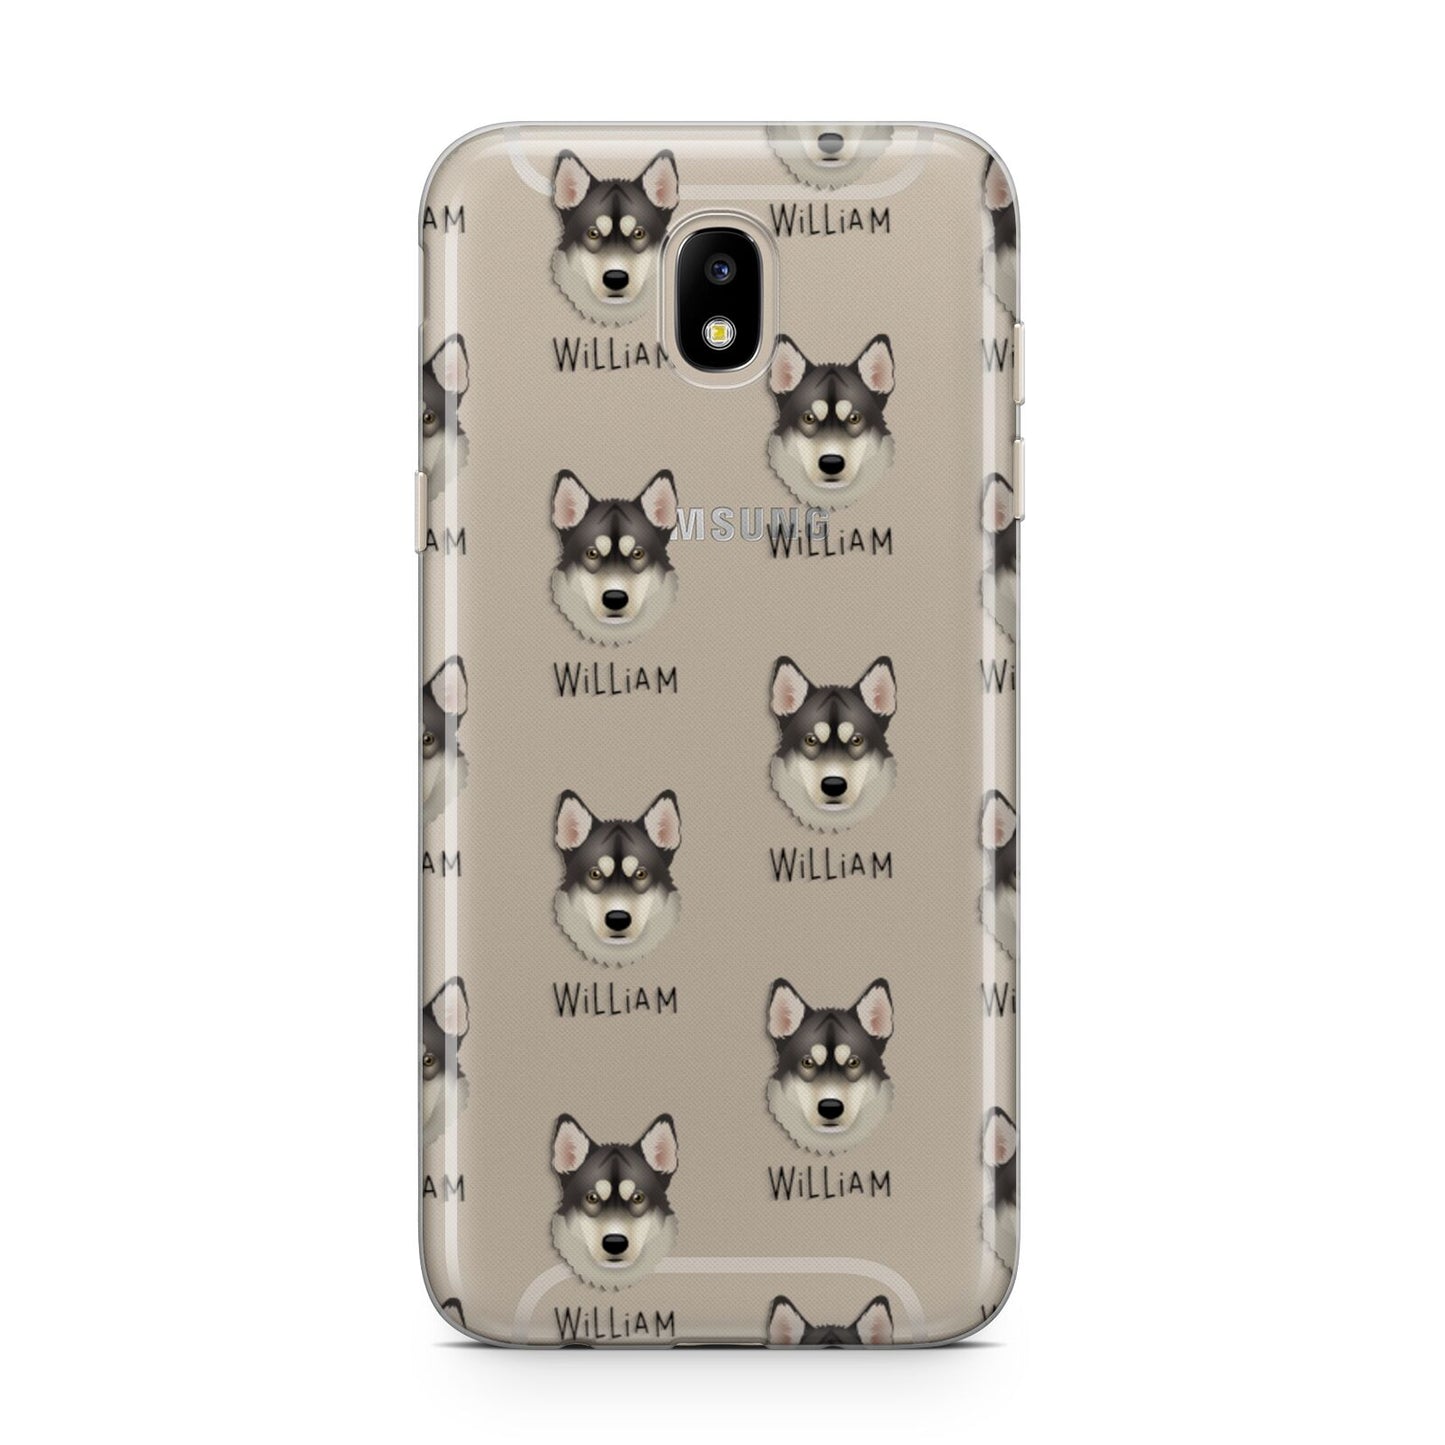 Tamaskan Icon with Name Samsung J5 2017 Case